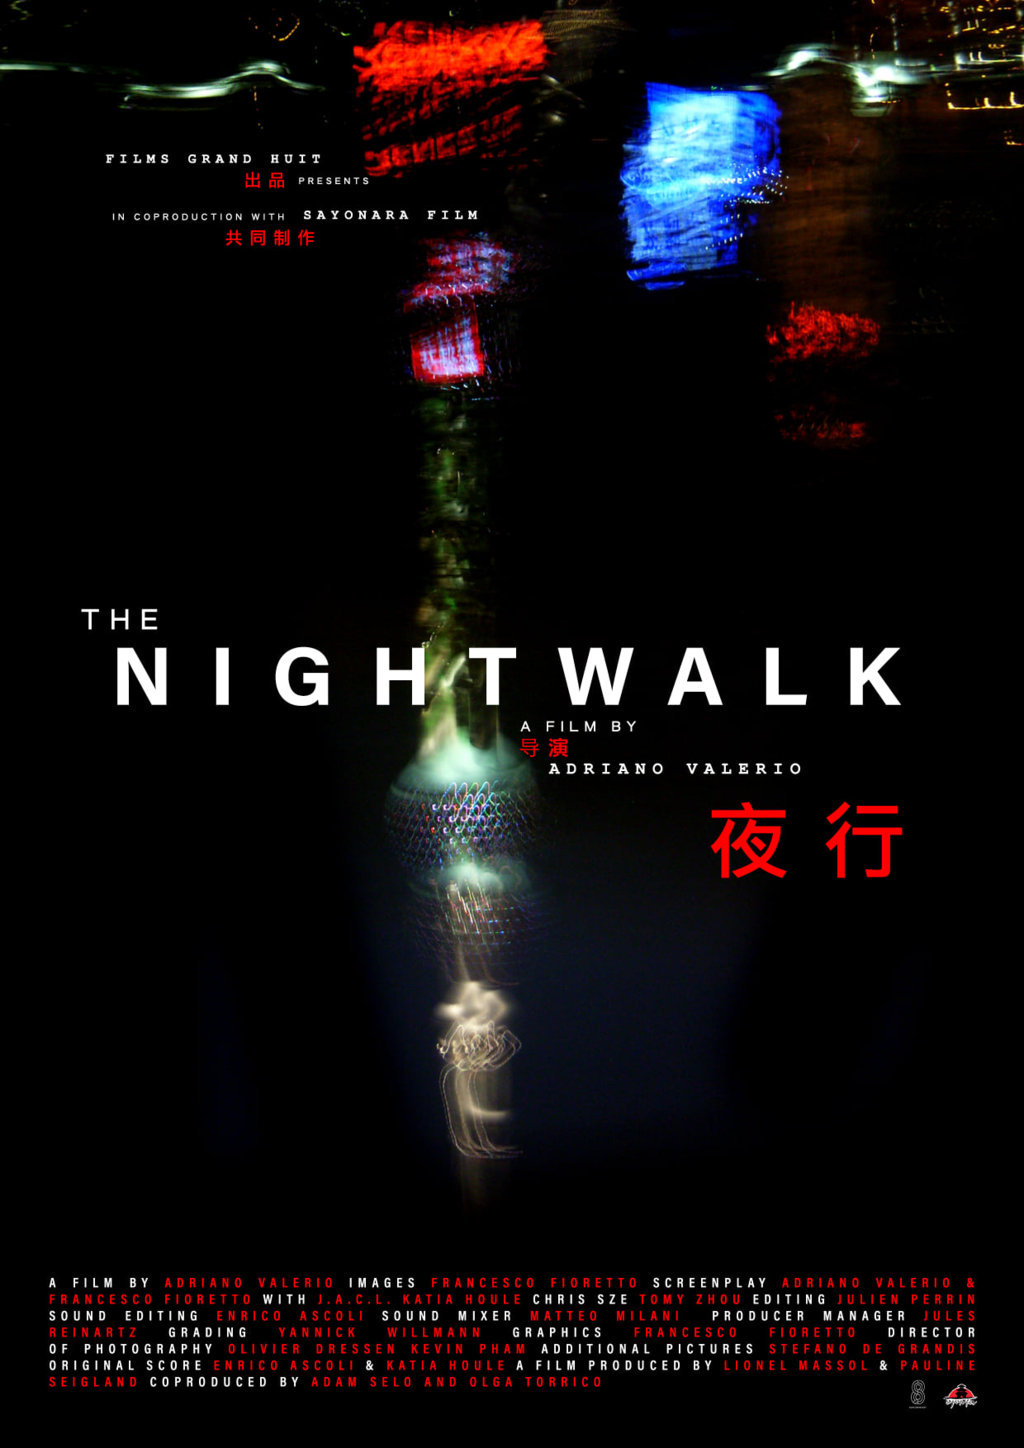 The Nightwalk<h3 style="font-size:10px; line-height:20px;"> di Adriano Valerio</h3>